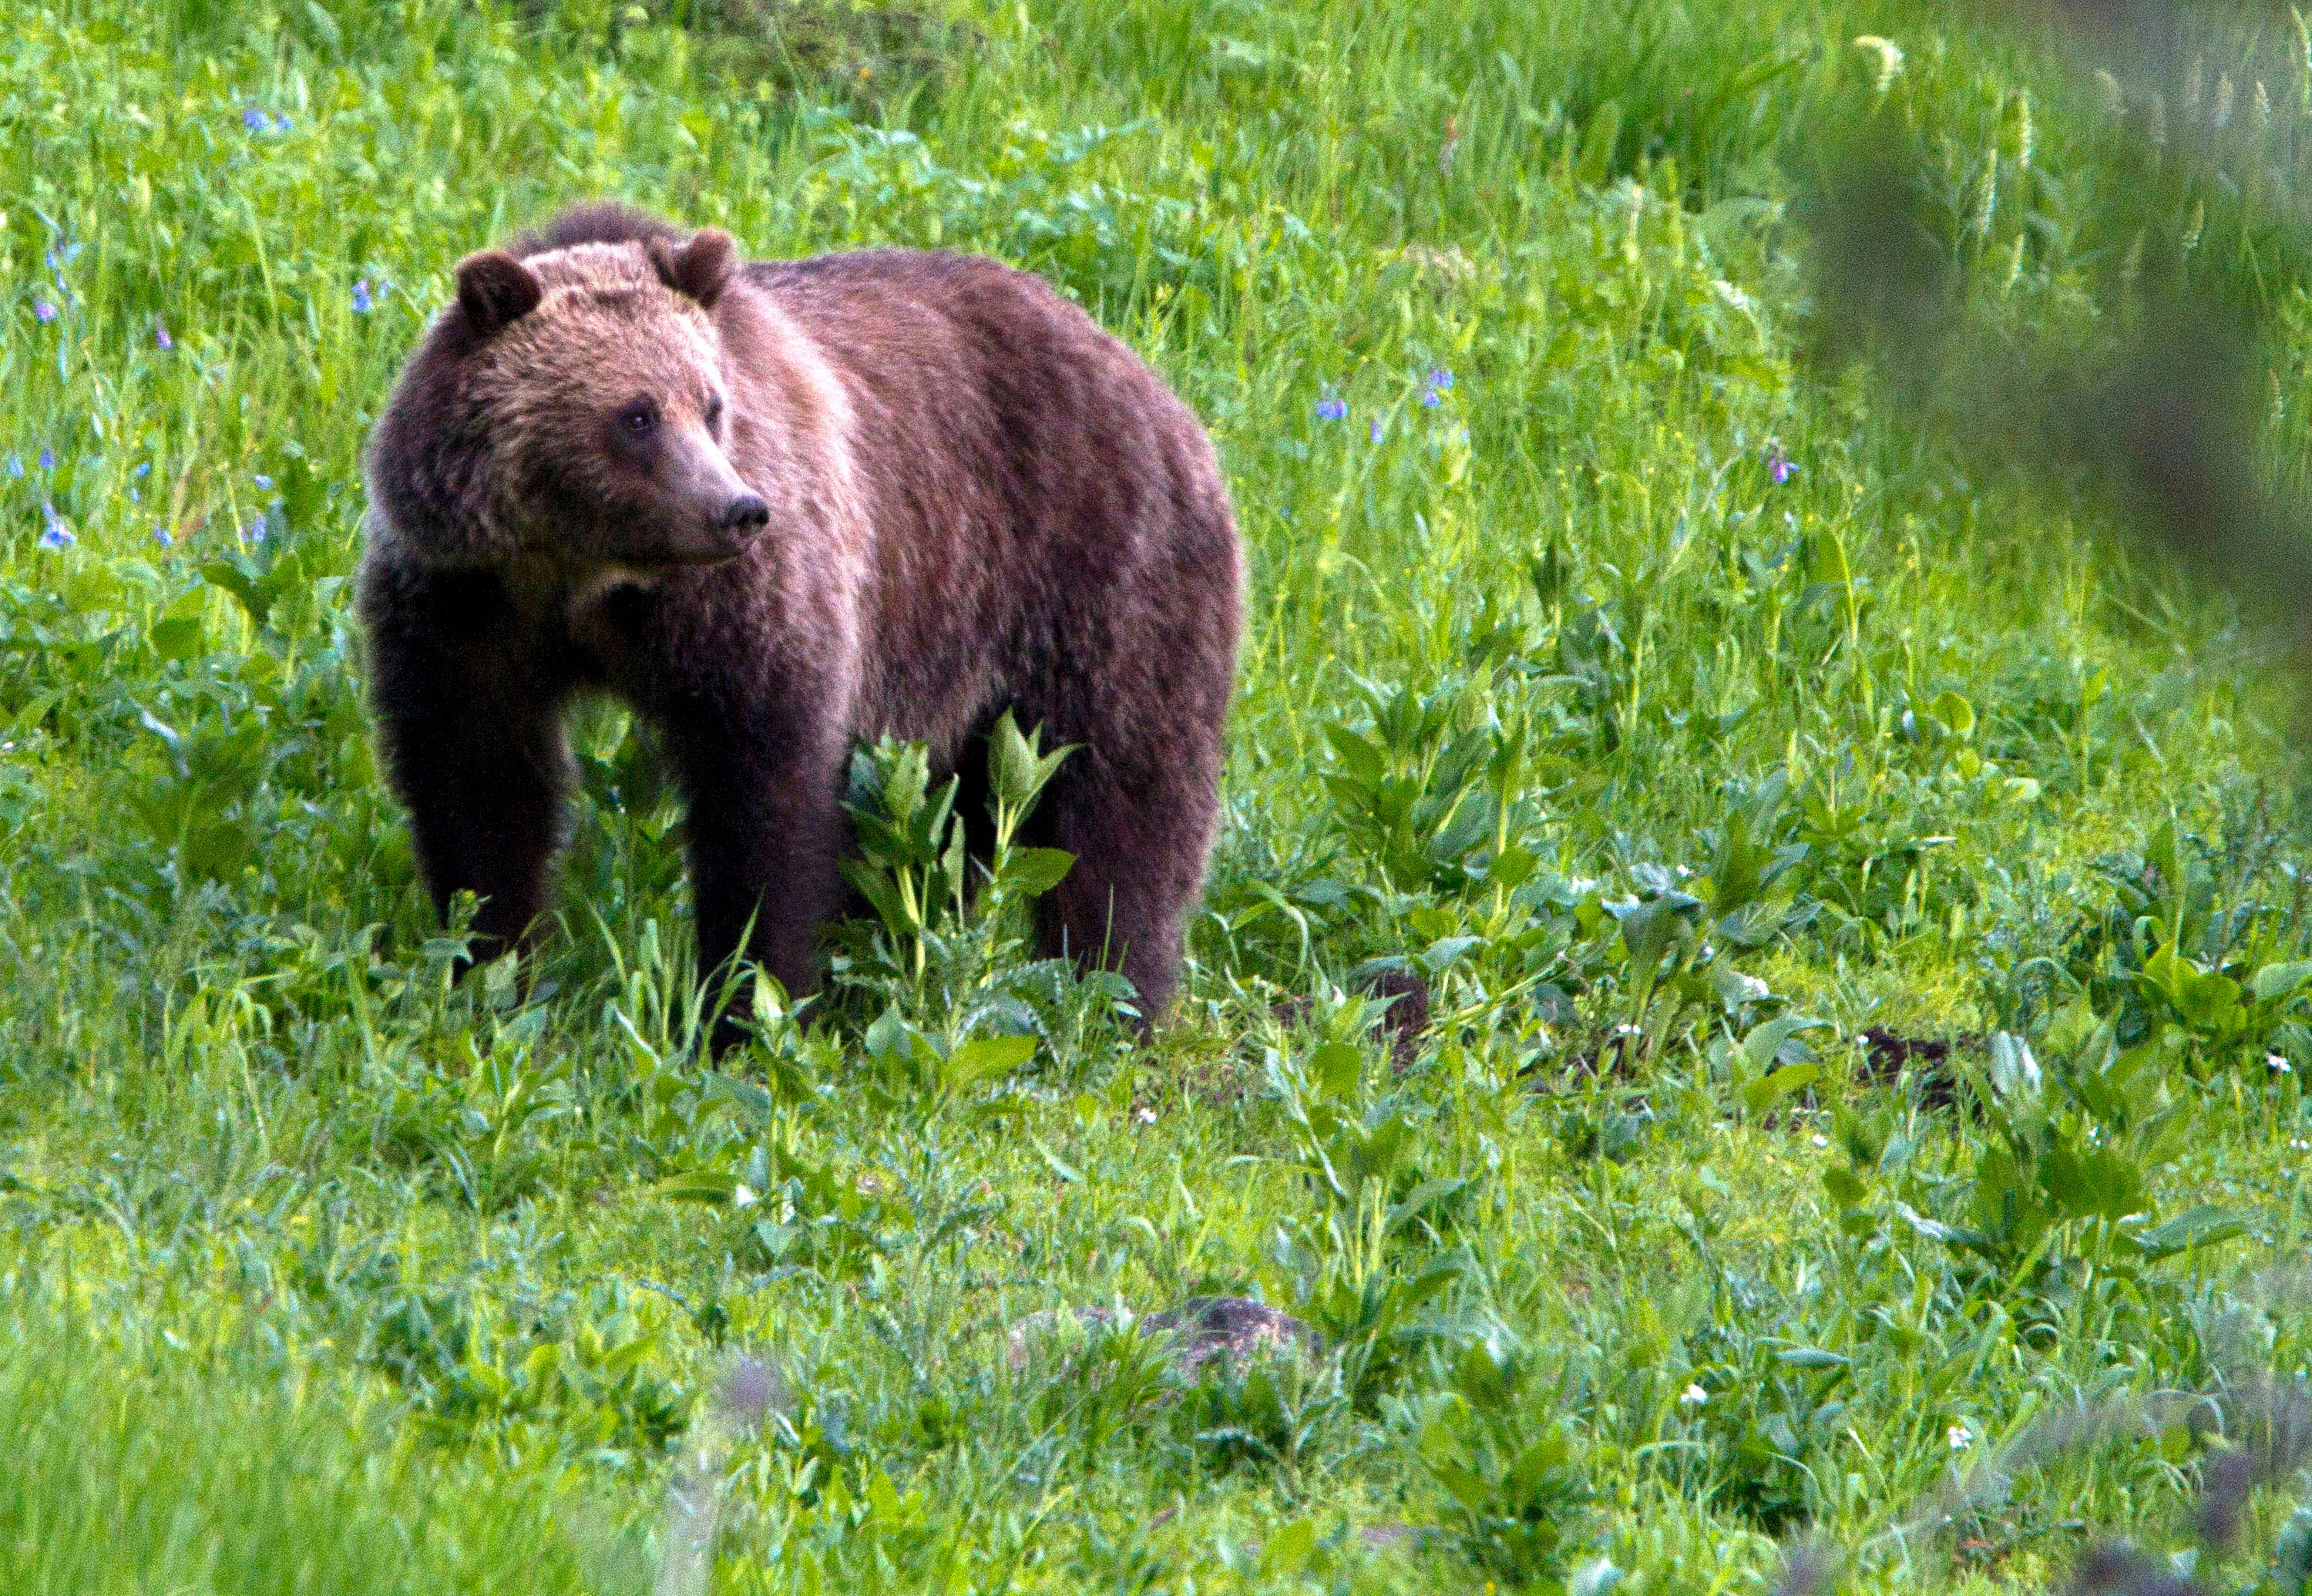 Pictured, stock image of a brown bear